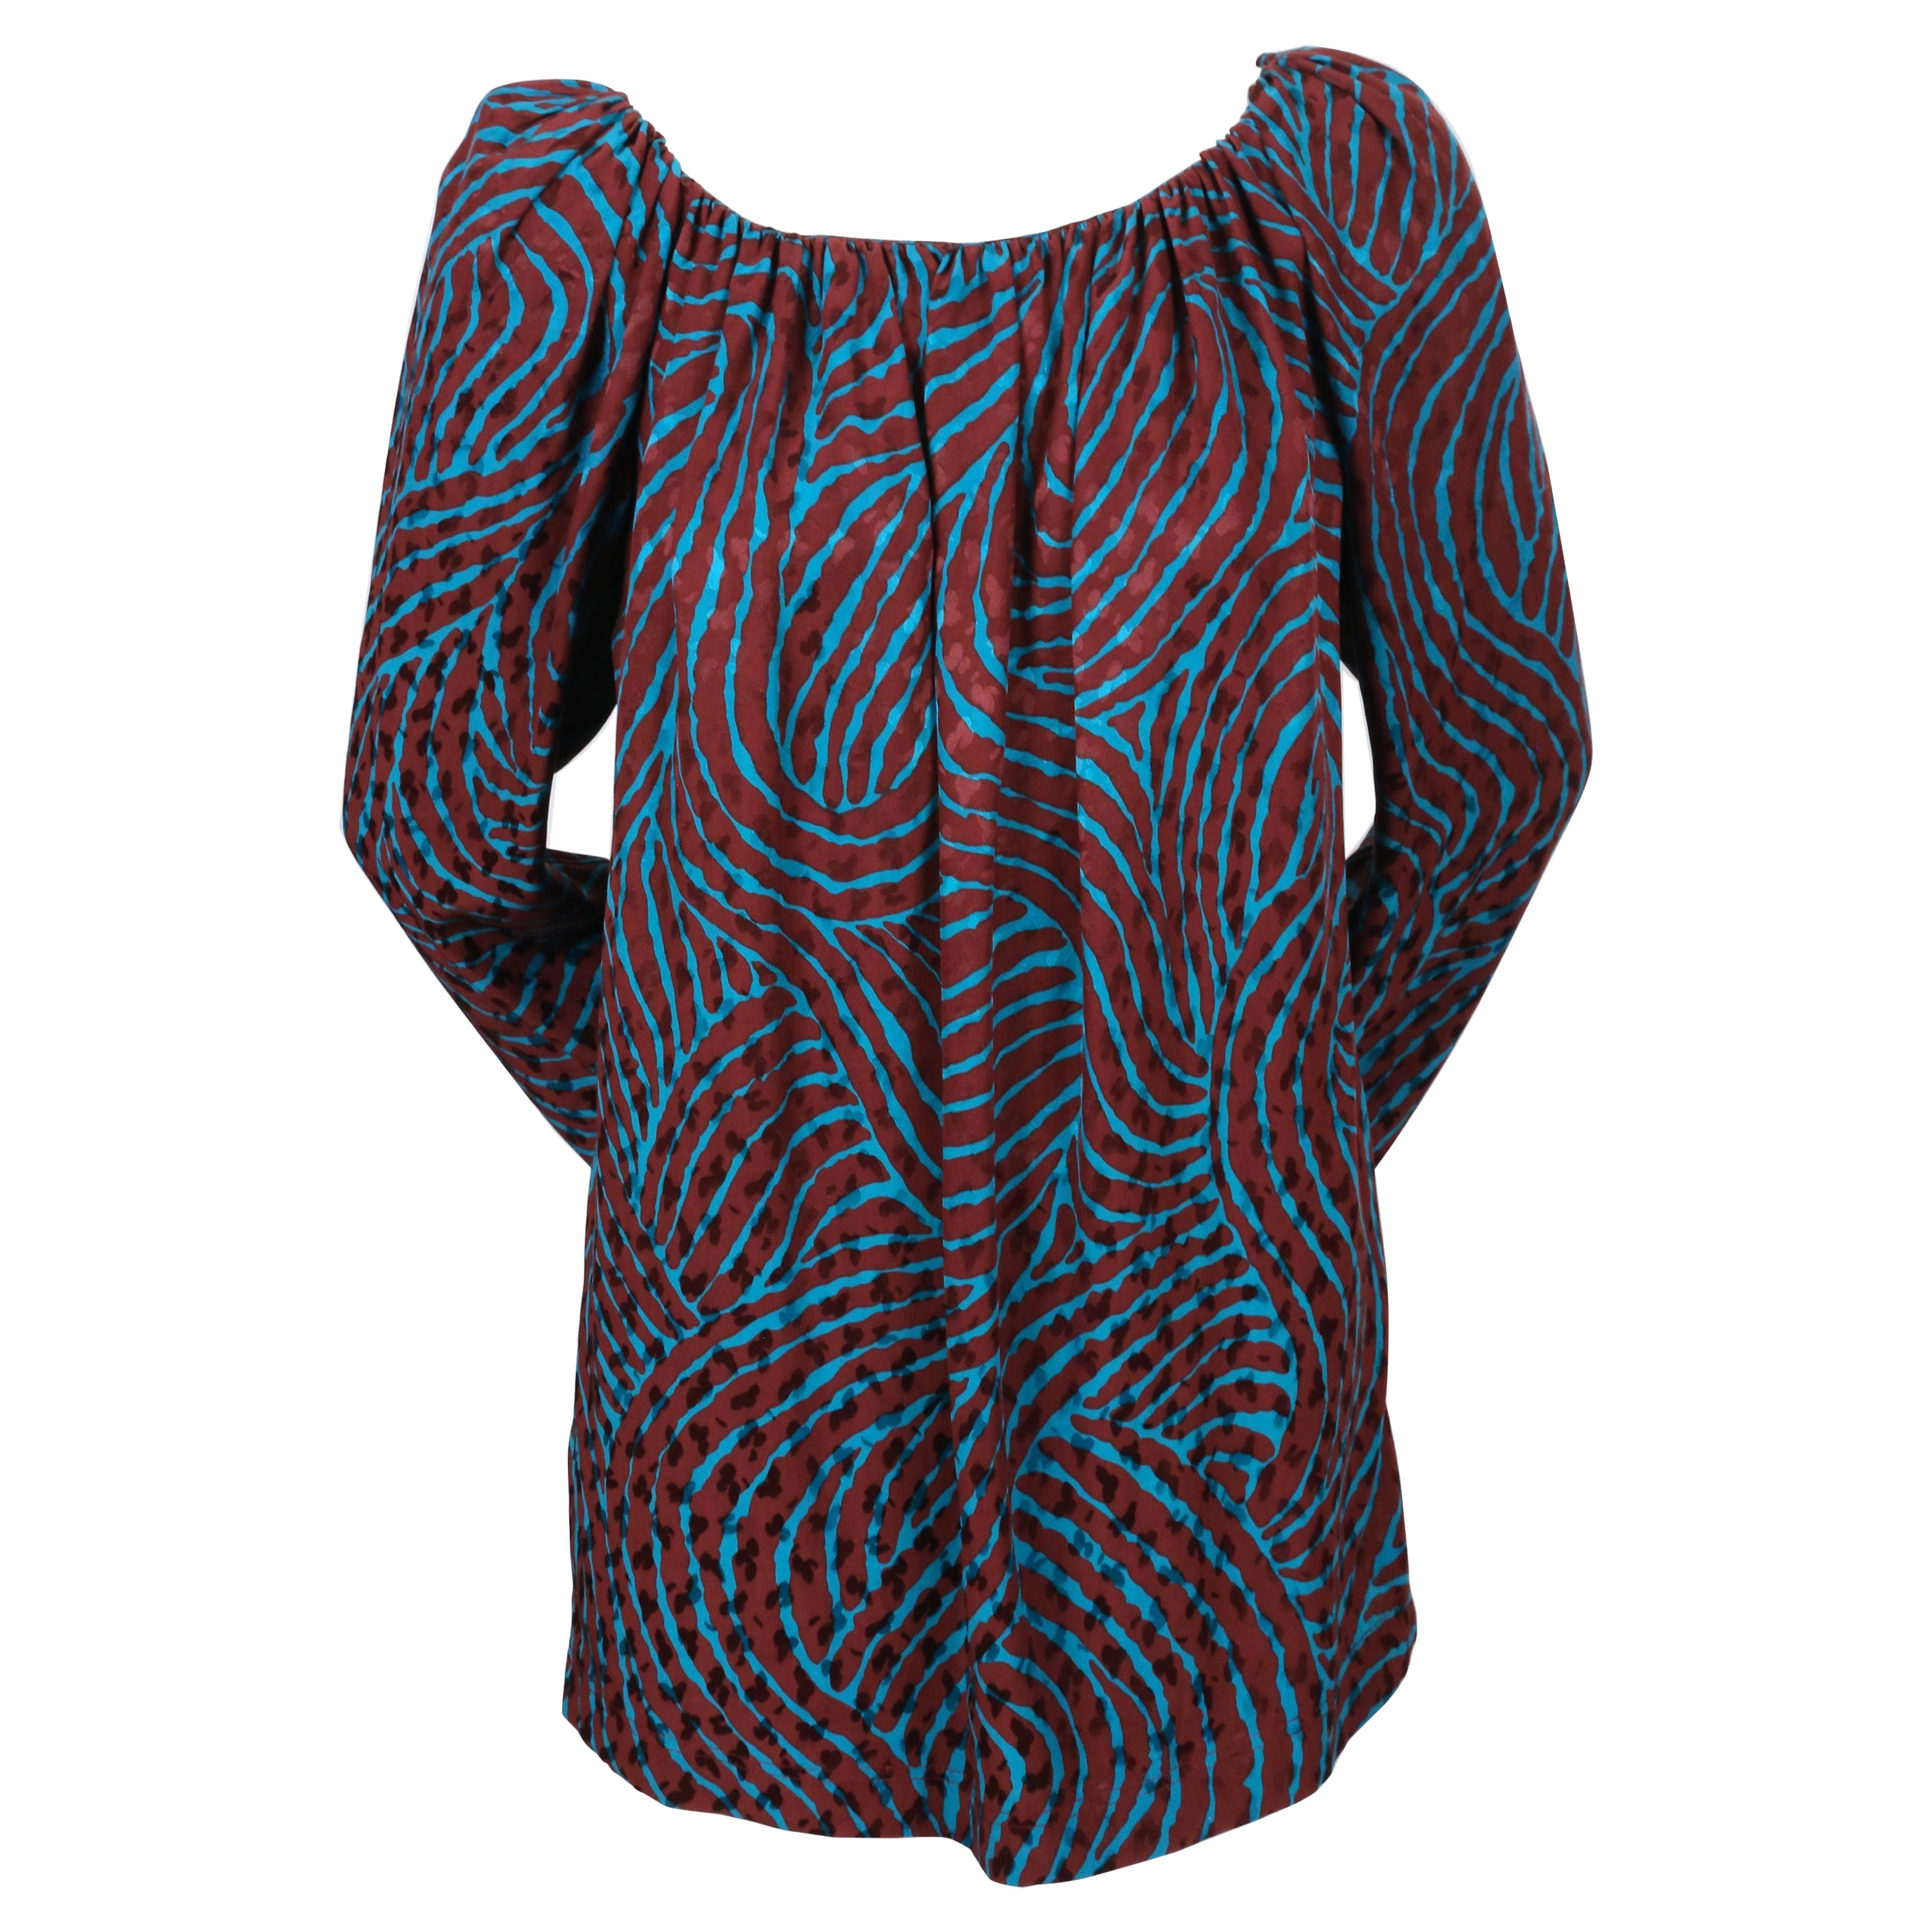 YVES SAINT LAURENT burgundy and turquoise blouse with draped neckline For Sale